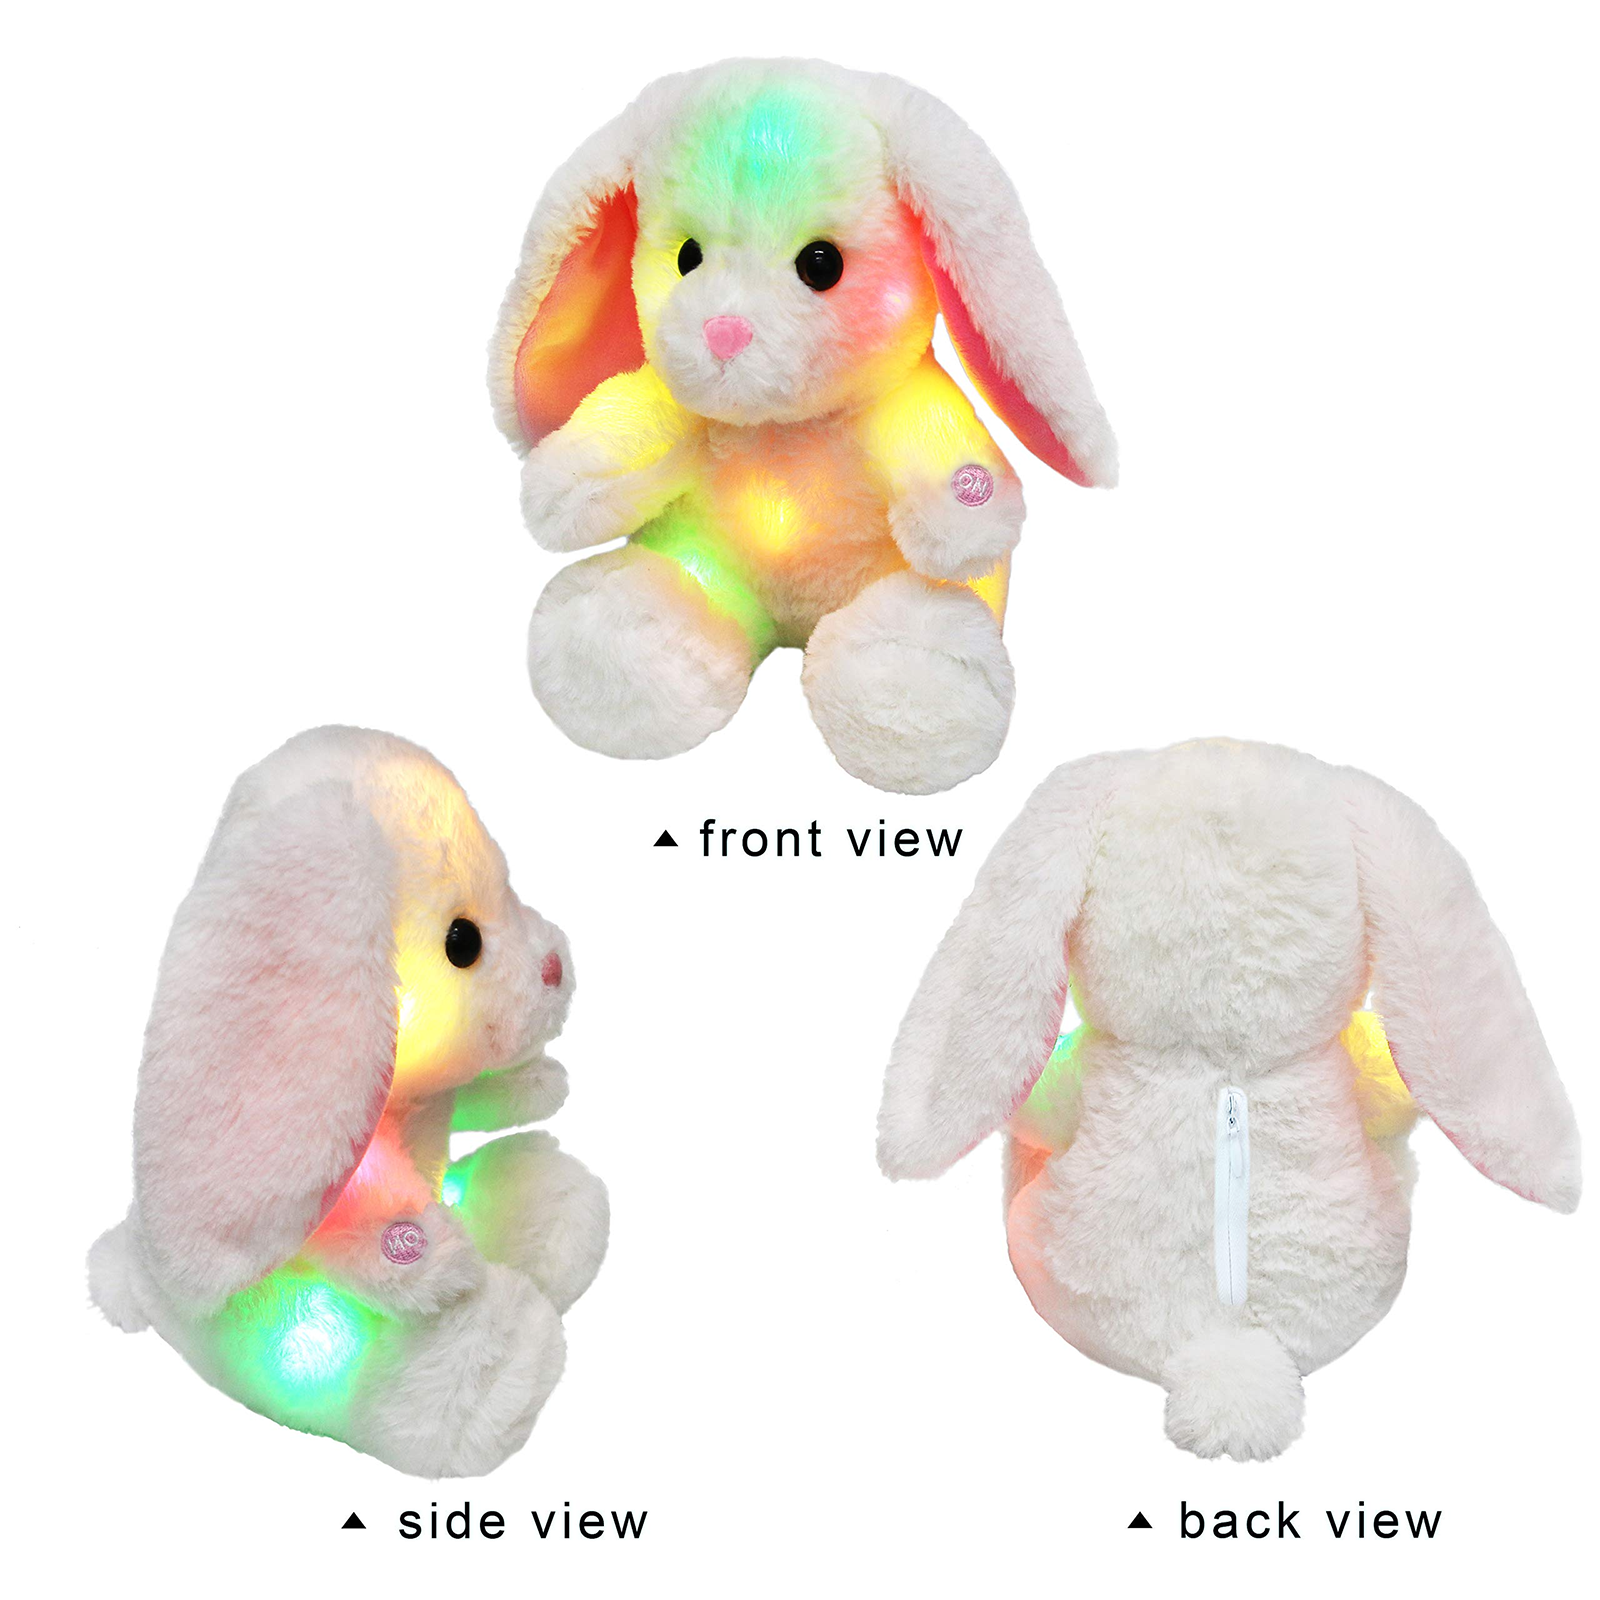 Bstaofy 8'' Light up White Bunny Soft Plush Toy LED Rabbit Lop Ear - Glow Guards